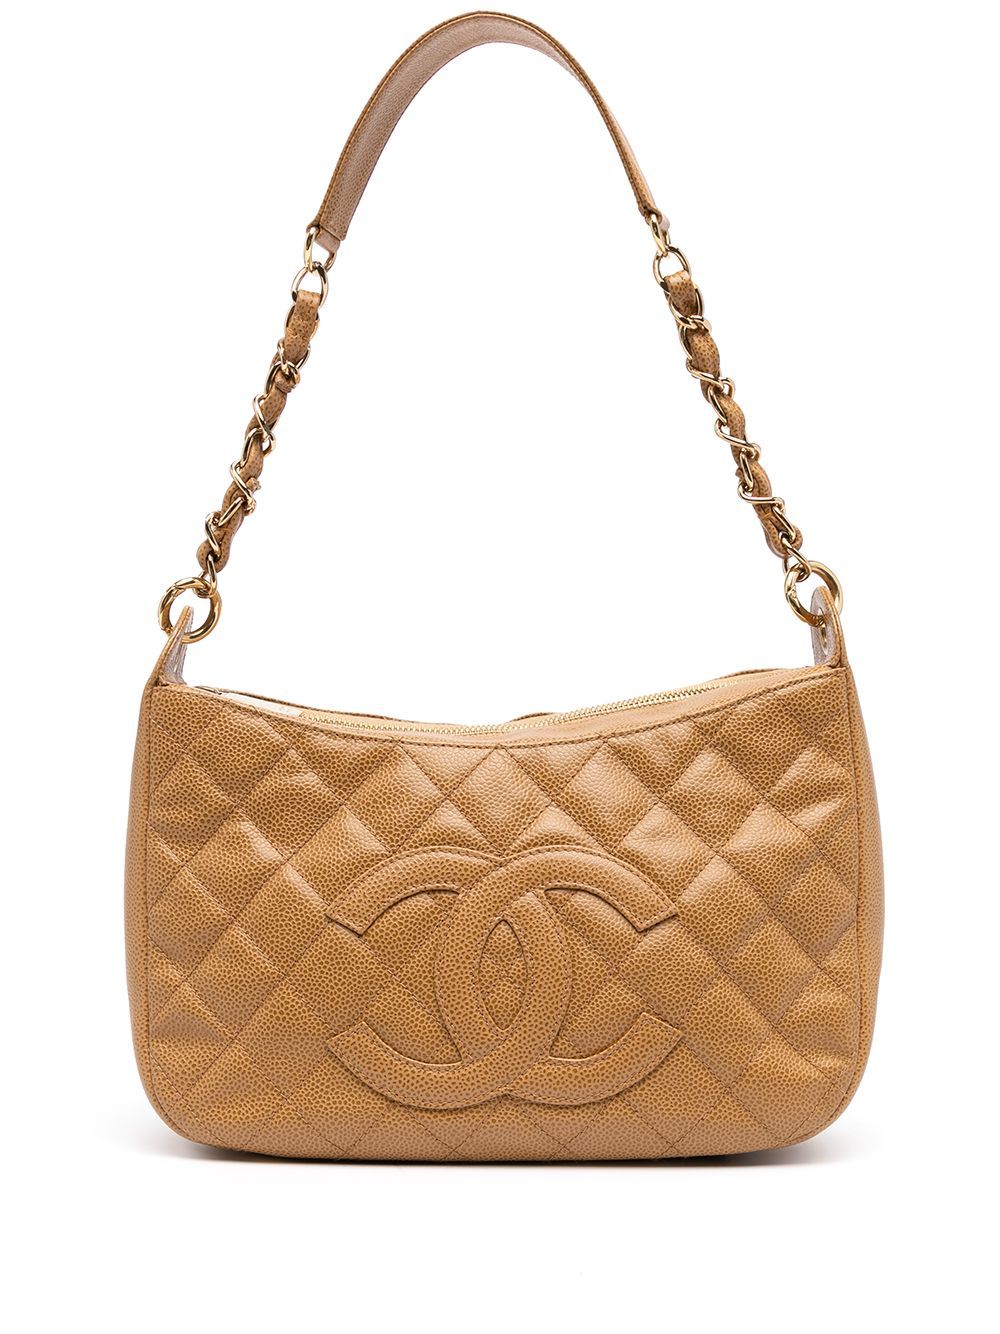 Chanel Pre-Owned 2002 Diamond Quilted CC Shoulder Bag - Farfetch | Farfetch Global